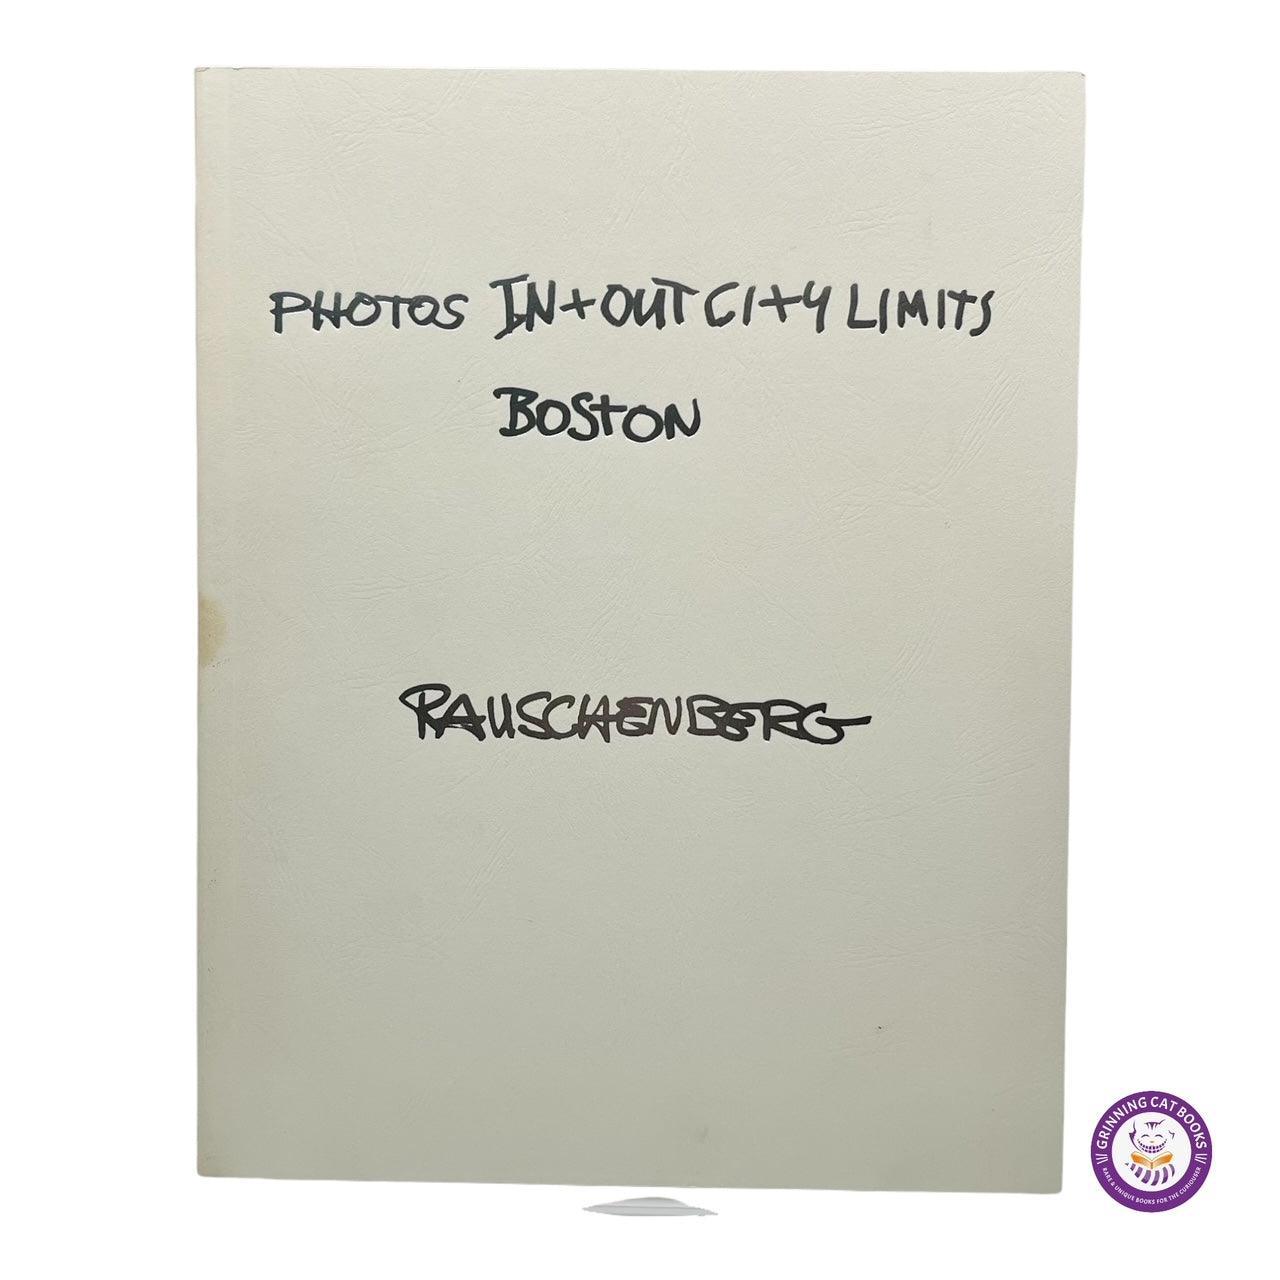 Photos In + Out City Limits: Boston (signed) - Grinning Cat Books - PHOTOGRAPHY - AMERICANA, BOSTON, PHOTOGRAPHY, SIGNED